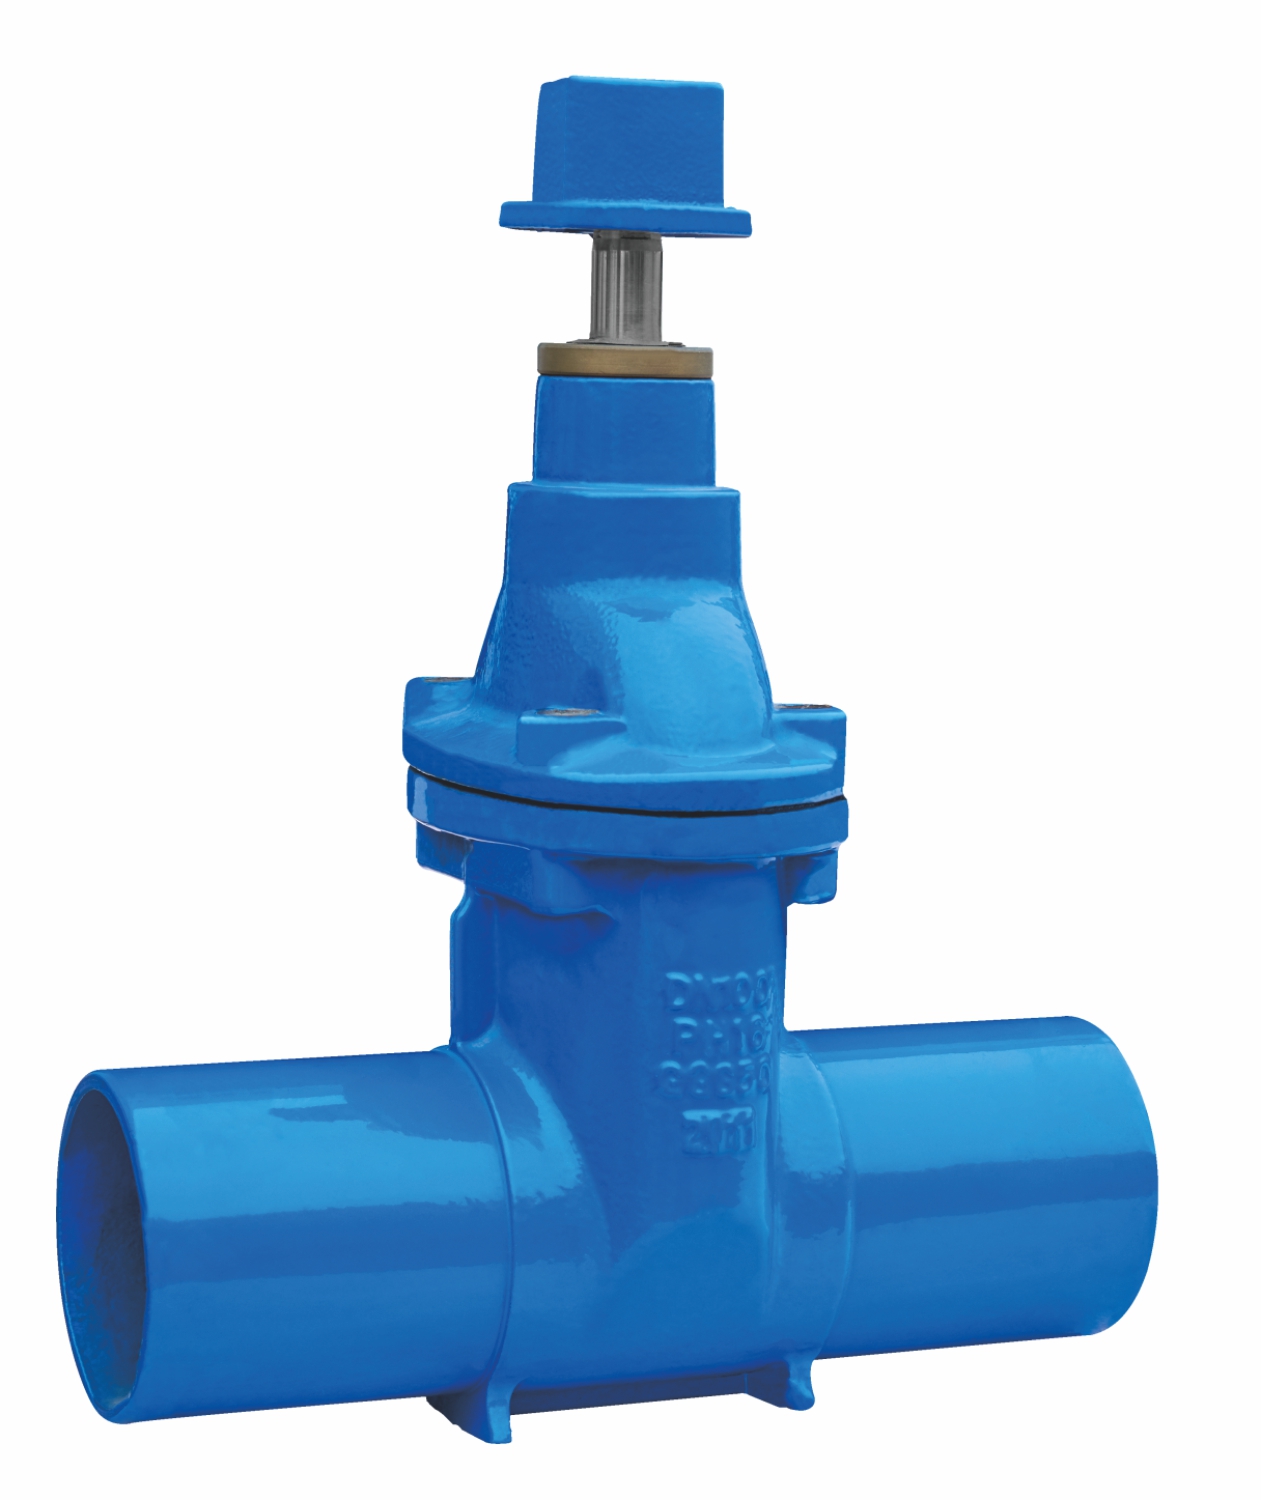 Double-spigotleded Type NRS Resilient Seated Gate Valve